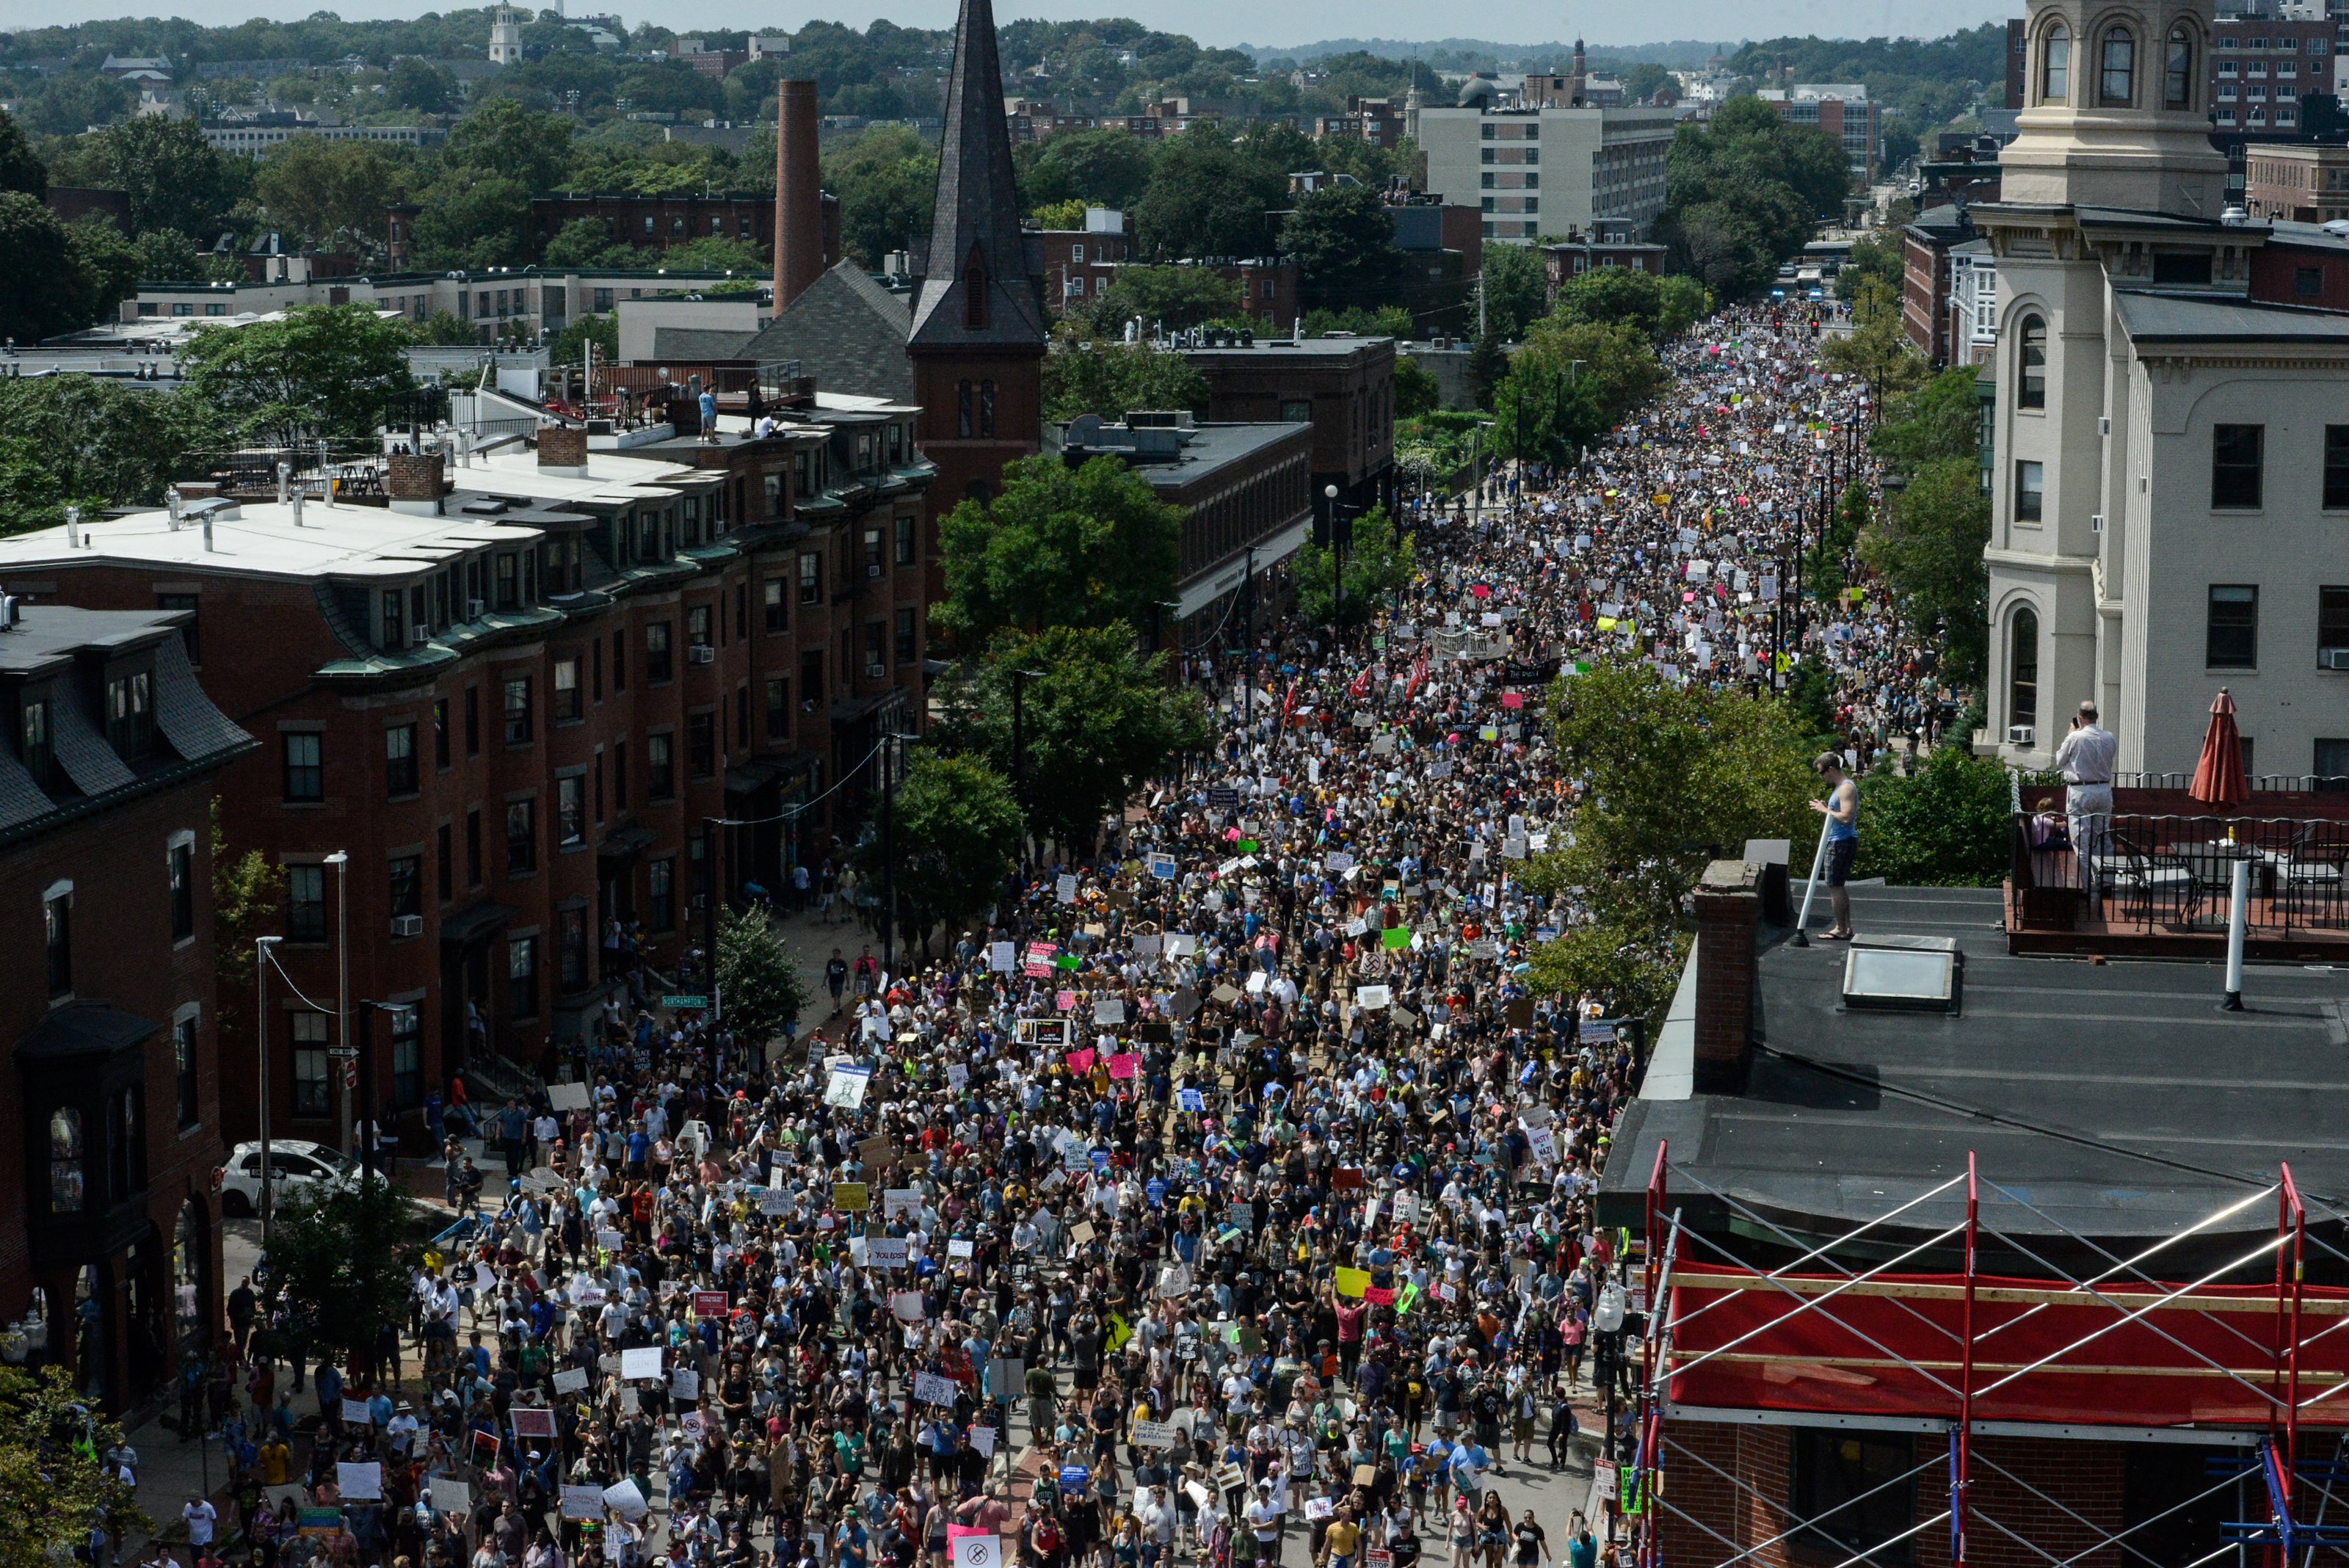 A large crowd of people march towards the Boston Commons to protest the Free Speech Rally, Aug. 19, 2017. (Stephanie Keith—REUTERS)